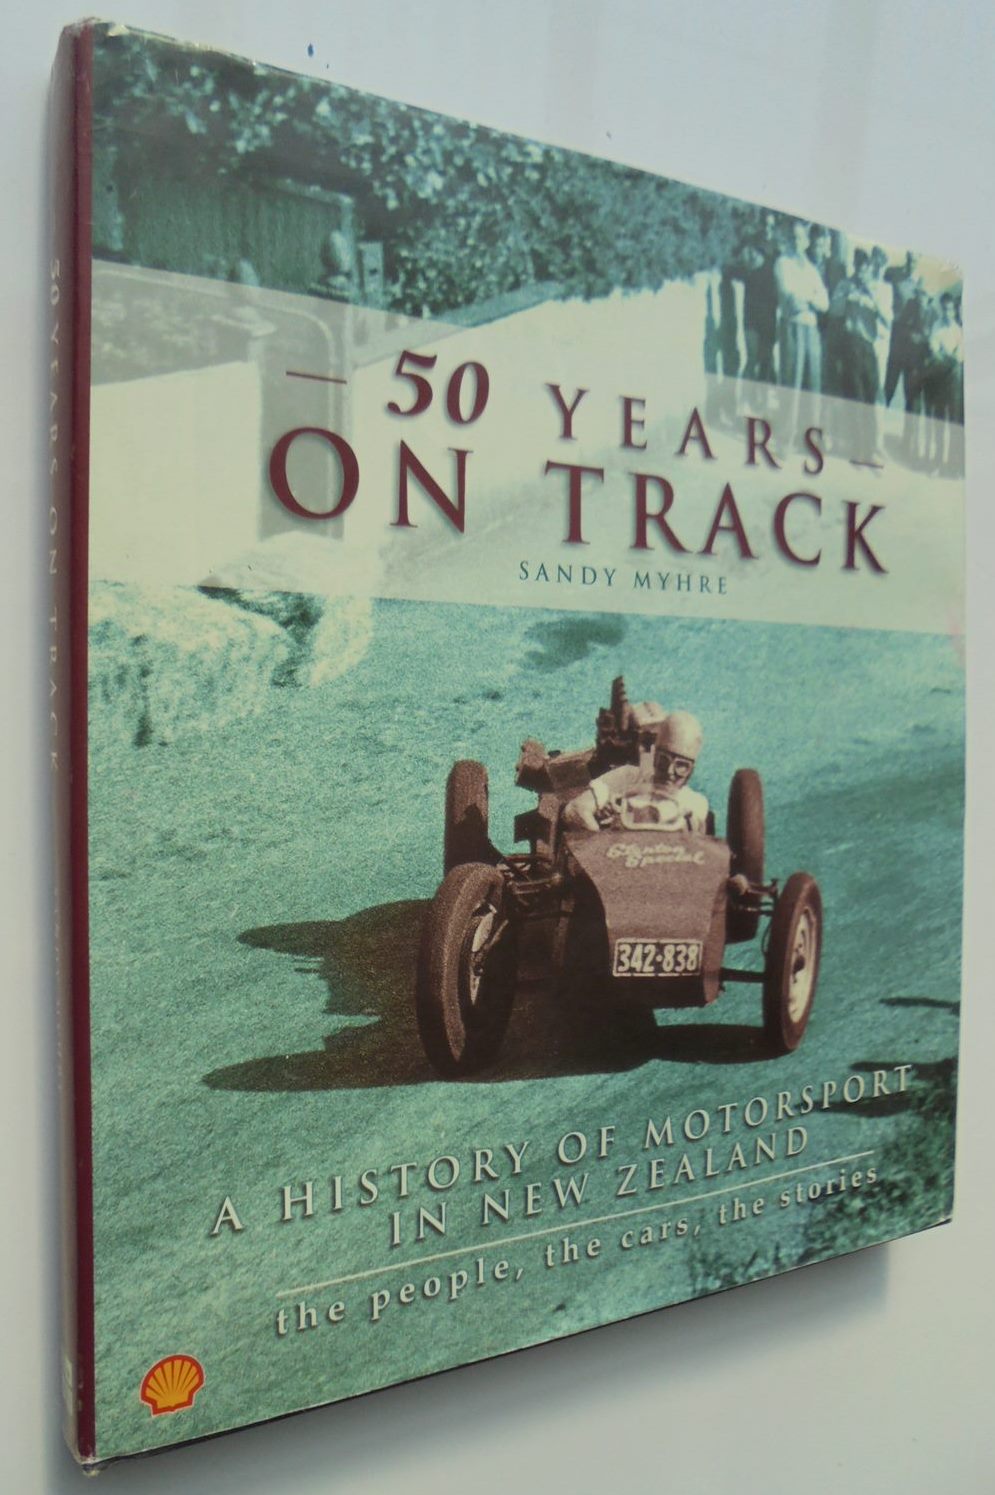 50 Years on Track History of Motorsport in NZ - By Sandy Myhre.